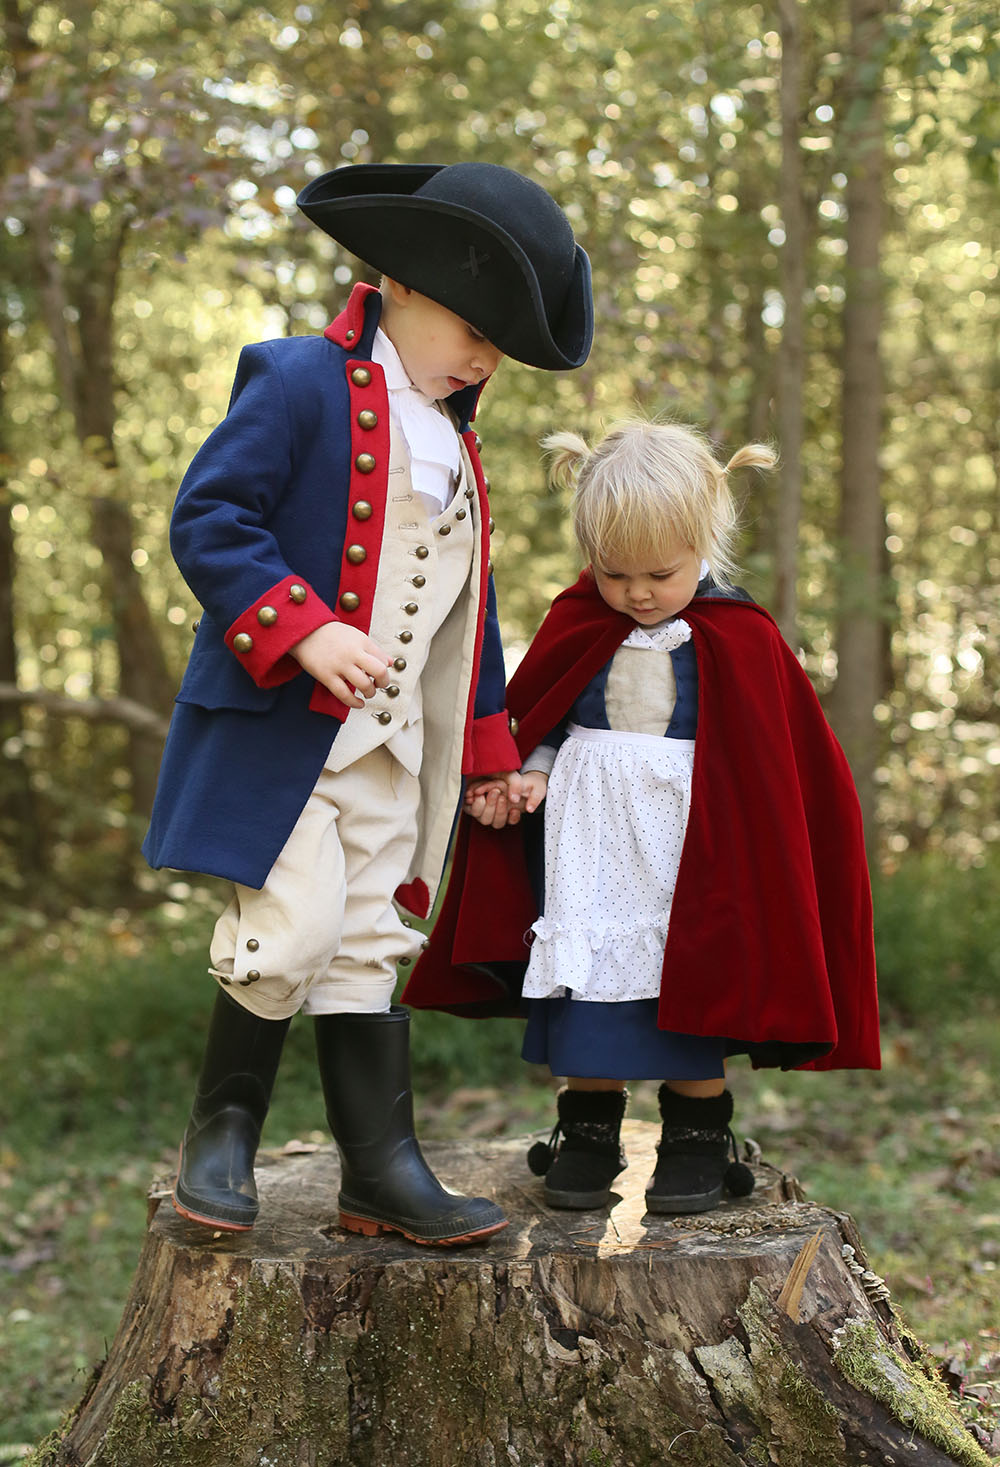 Alexander Hamilton and Little Red Riding Hood